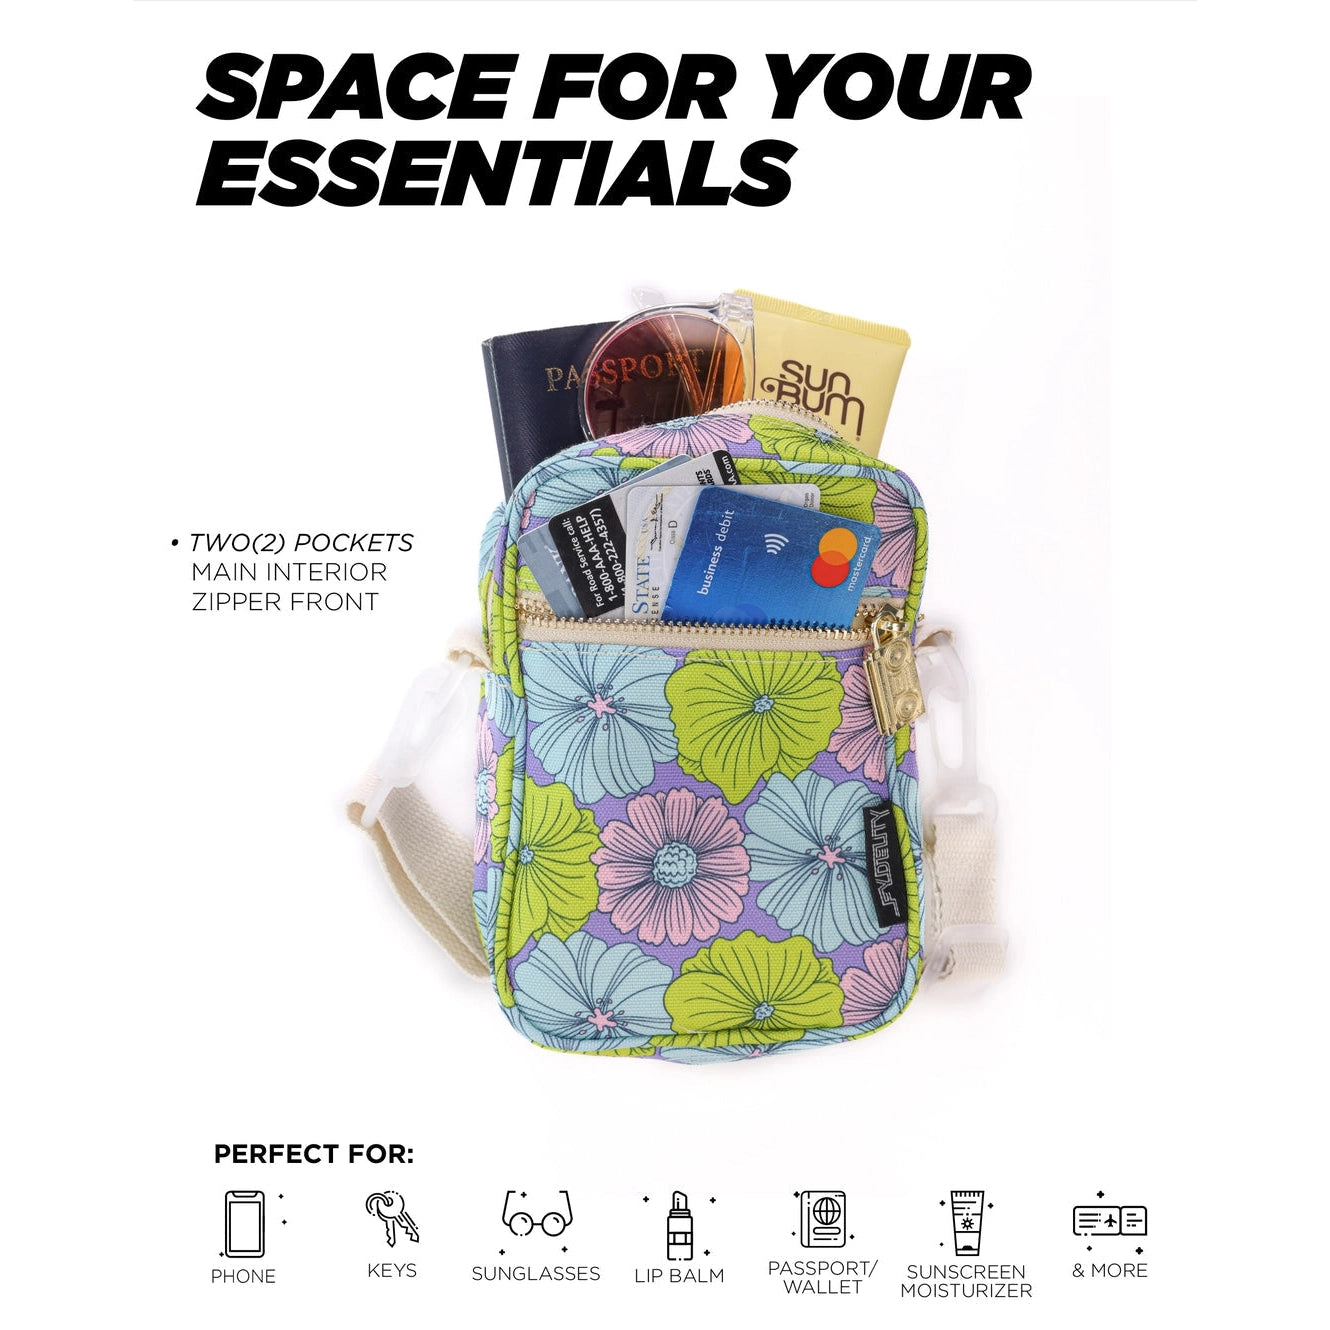 Floral '70s Crossbody Mini Brick Bag | Made of 100% Recycled Bottles